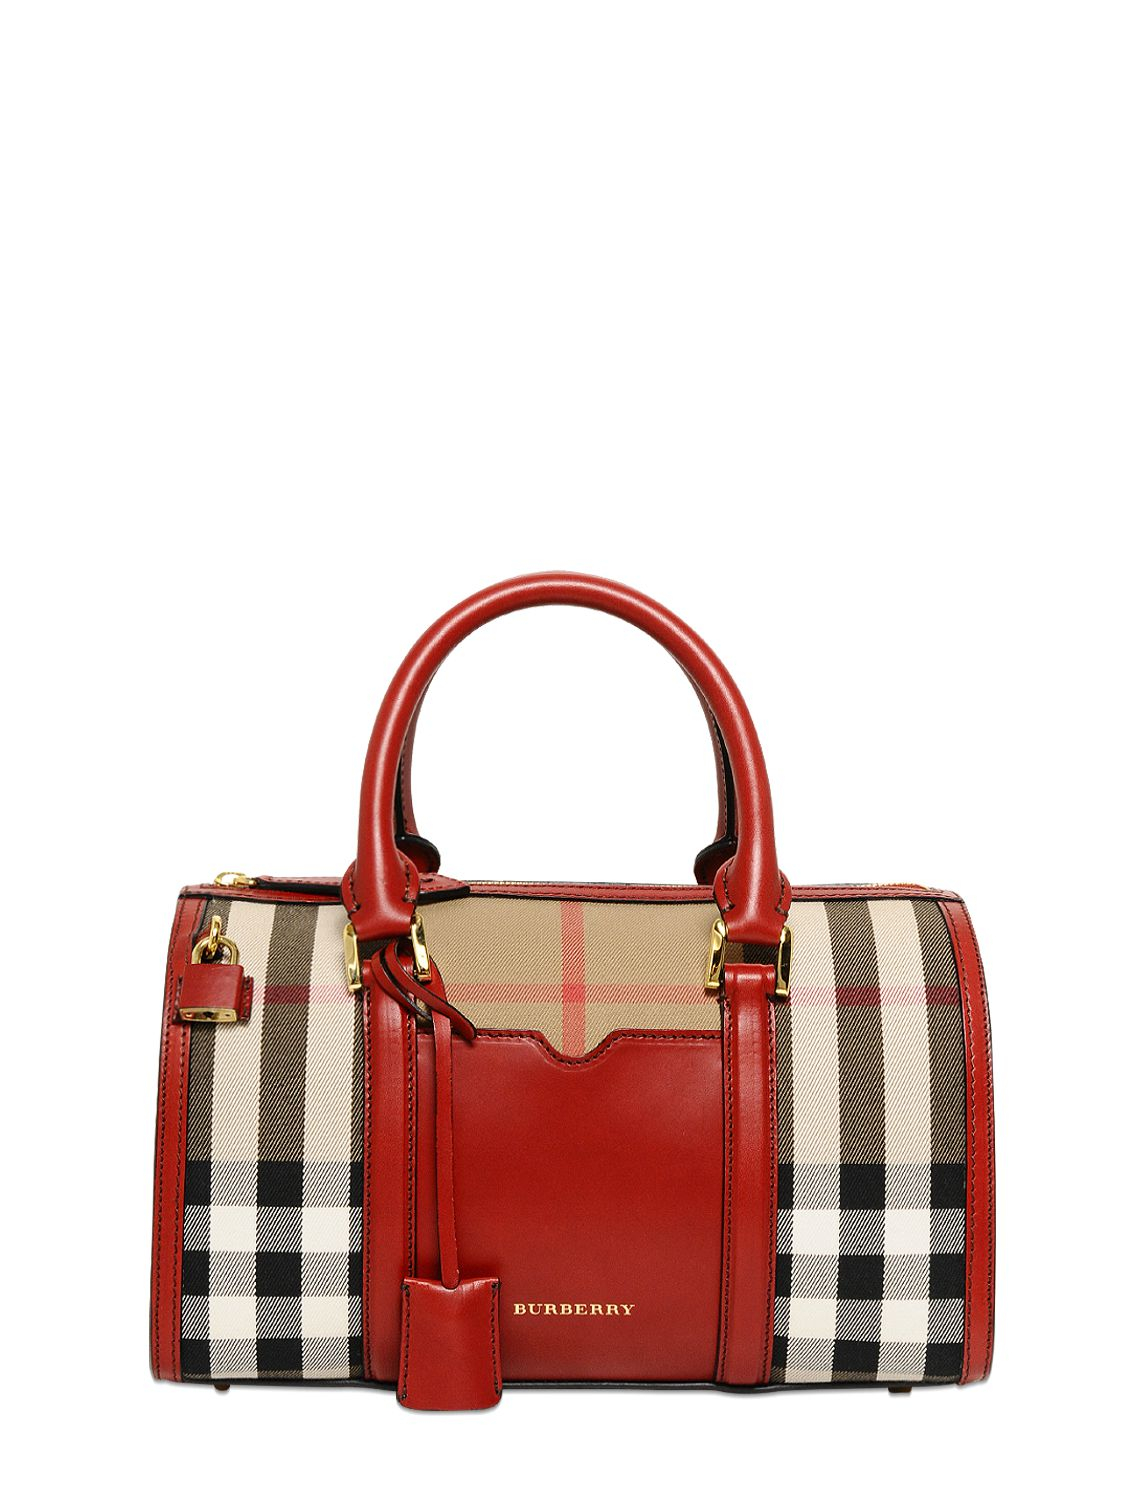 Lyst - Burberry Medium Alchester Bridle Check Bag in Red